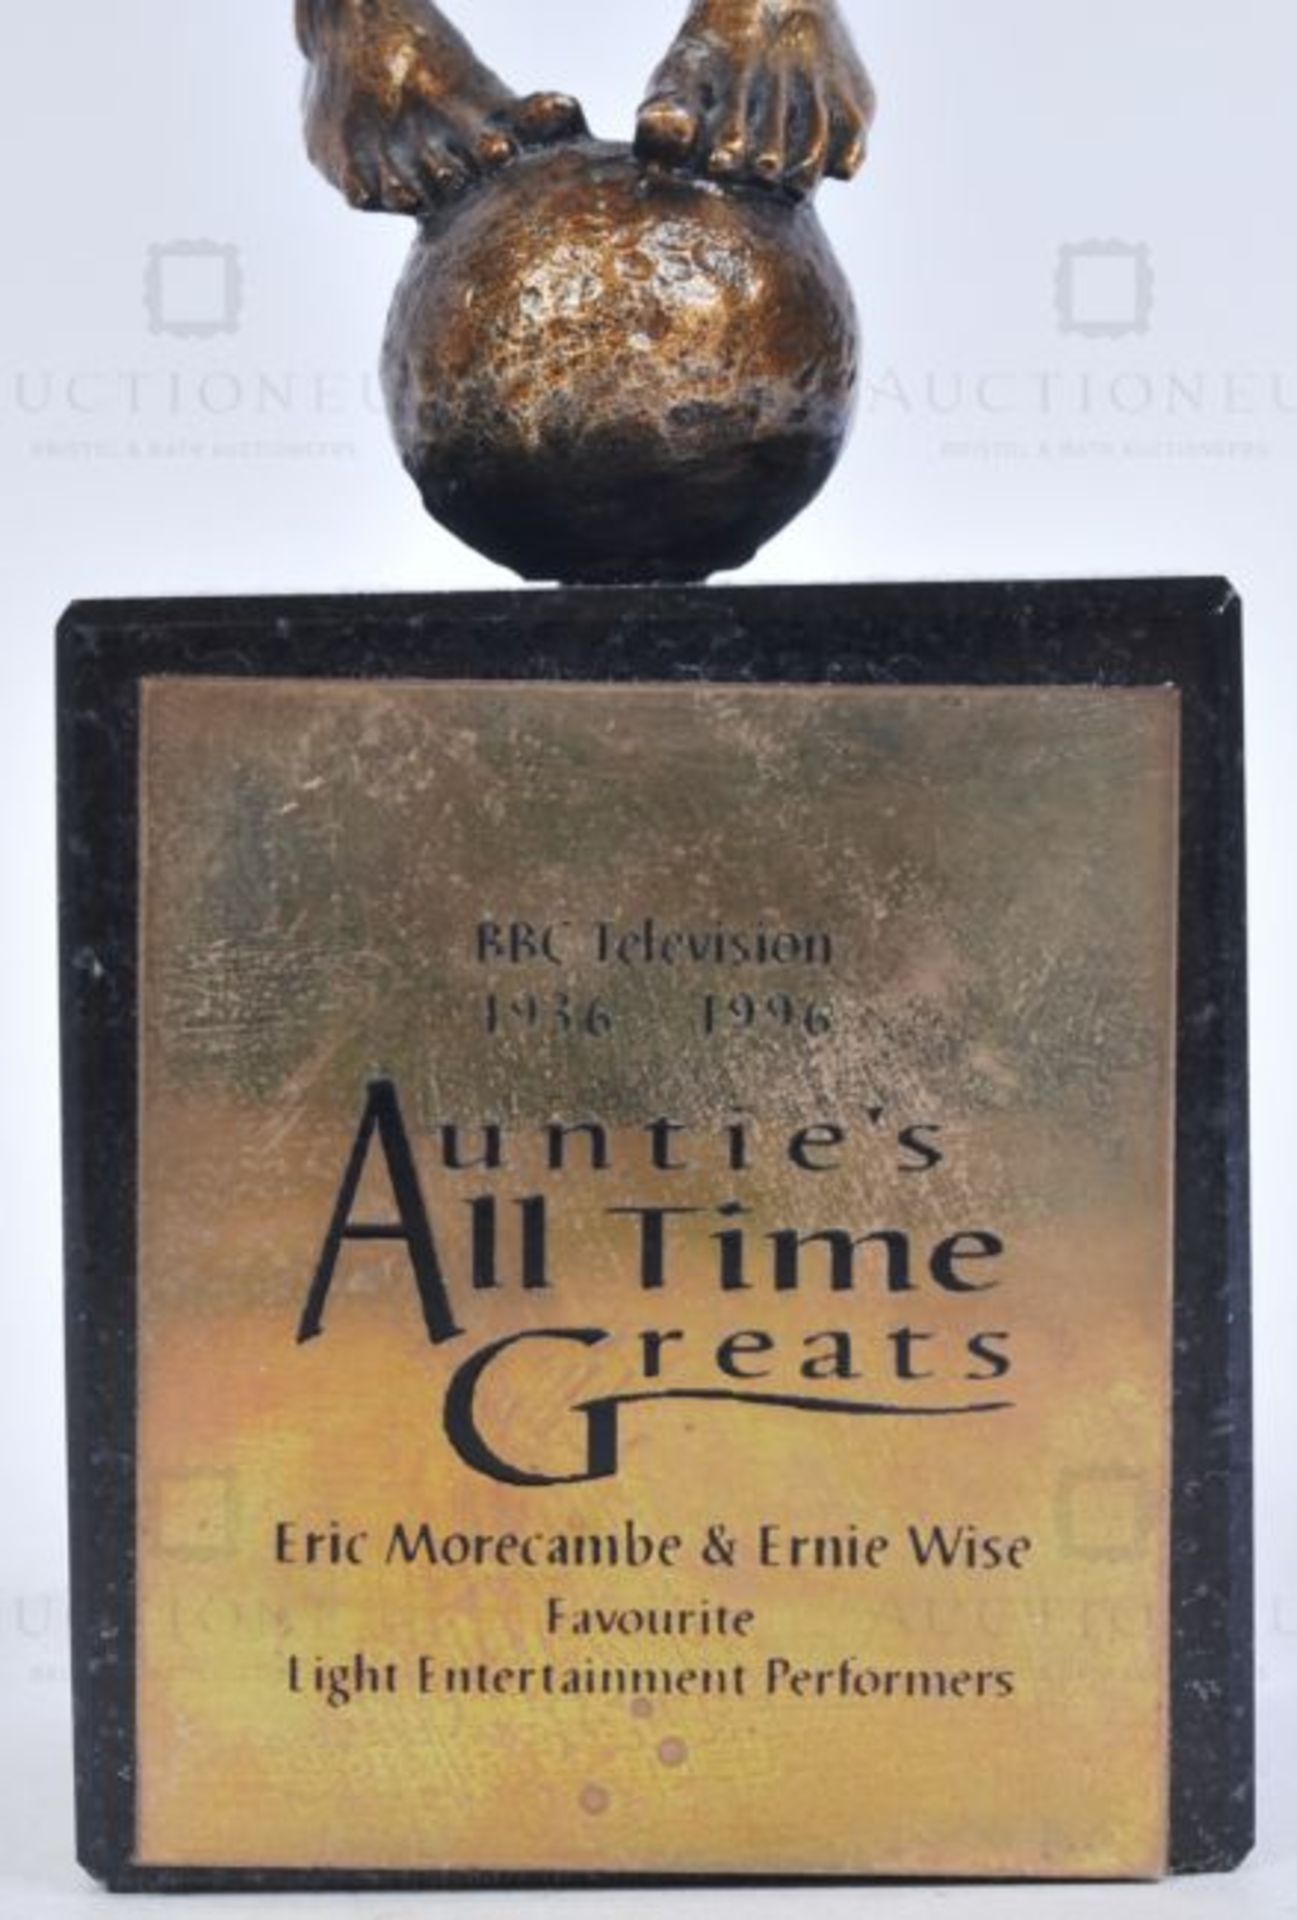 MORECAMBE & WISE - AUNTIE'S ALL TIME GREATS 'FAVOURITE' AWARD TROPHY - Image 4 of 5